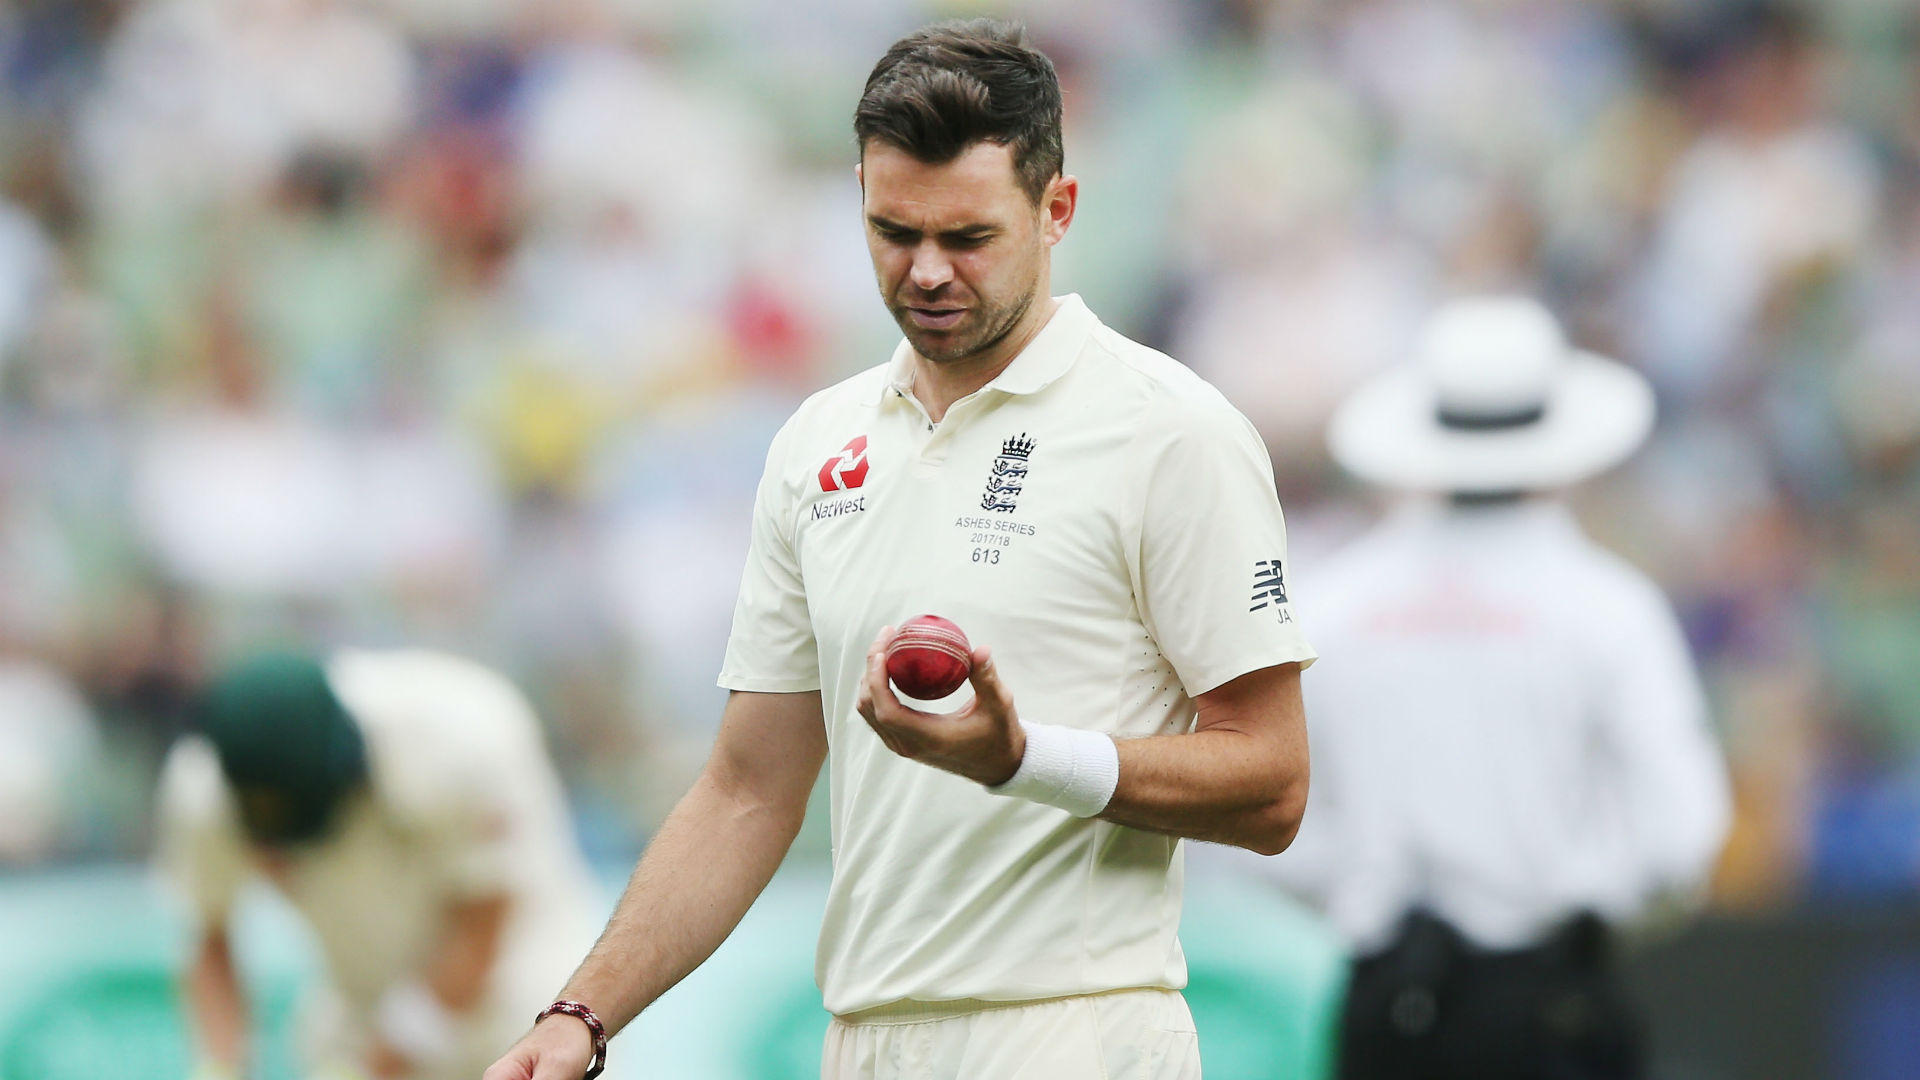 England's Anderson 'worried' over Test cricket's future